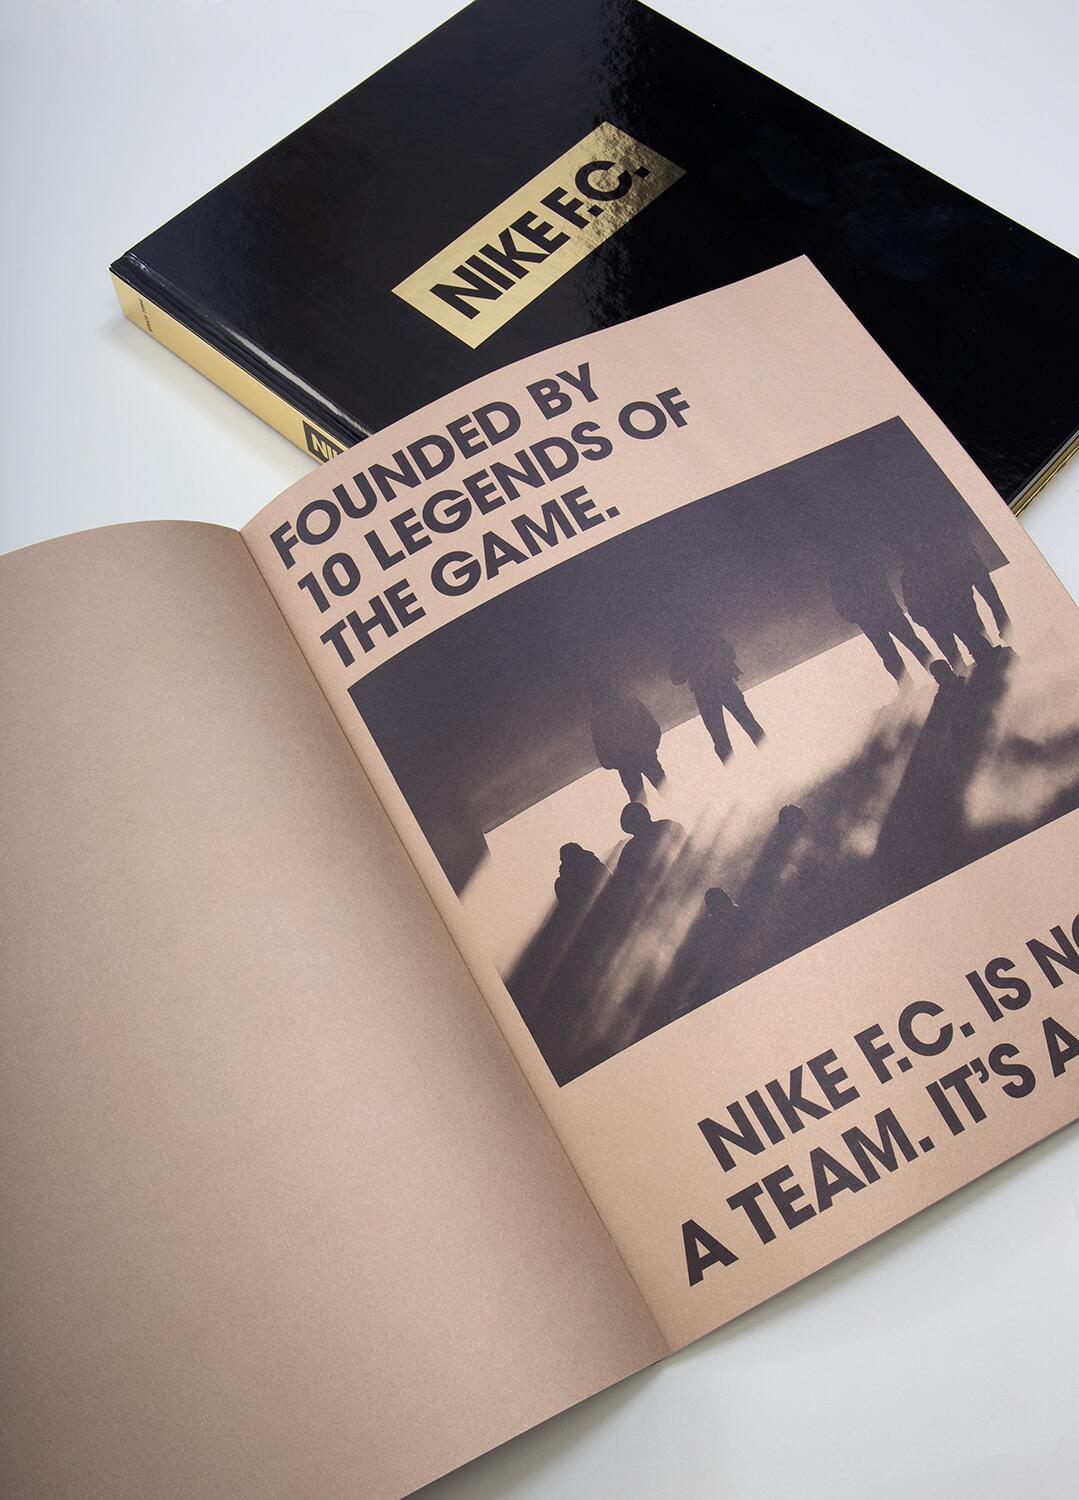 HORT (Eike König) on X: "NIKE F.C. - Brand and look book we've been working  on arrived. http://t.co/pzaj27mROO" / X